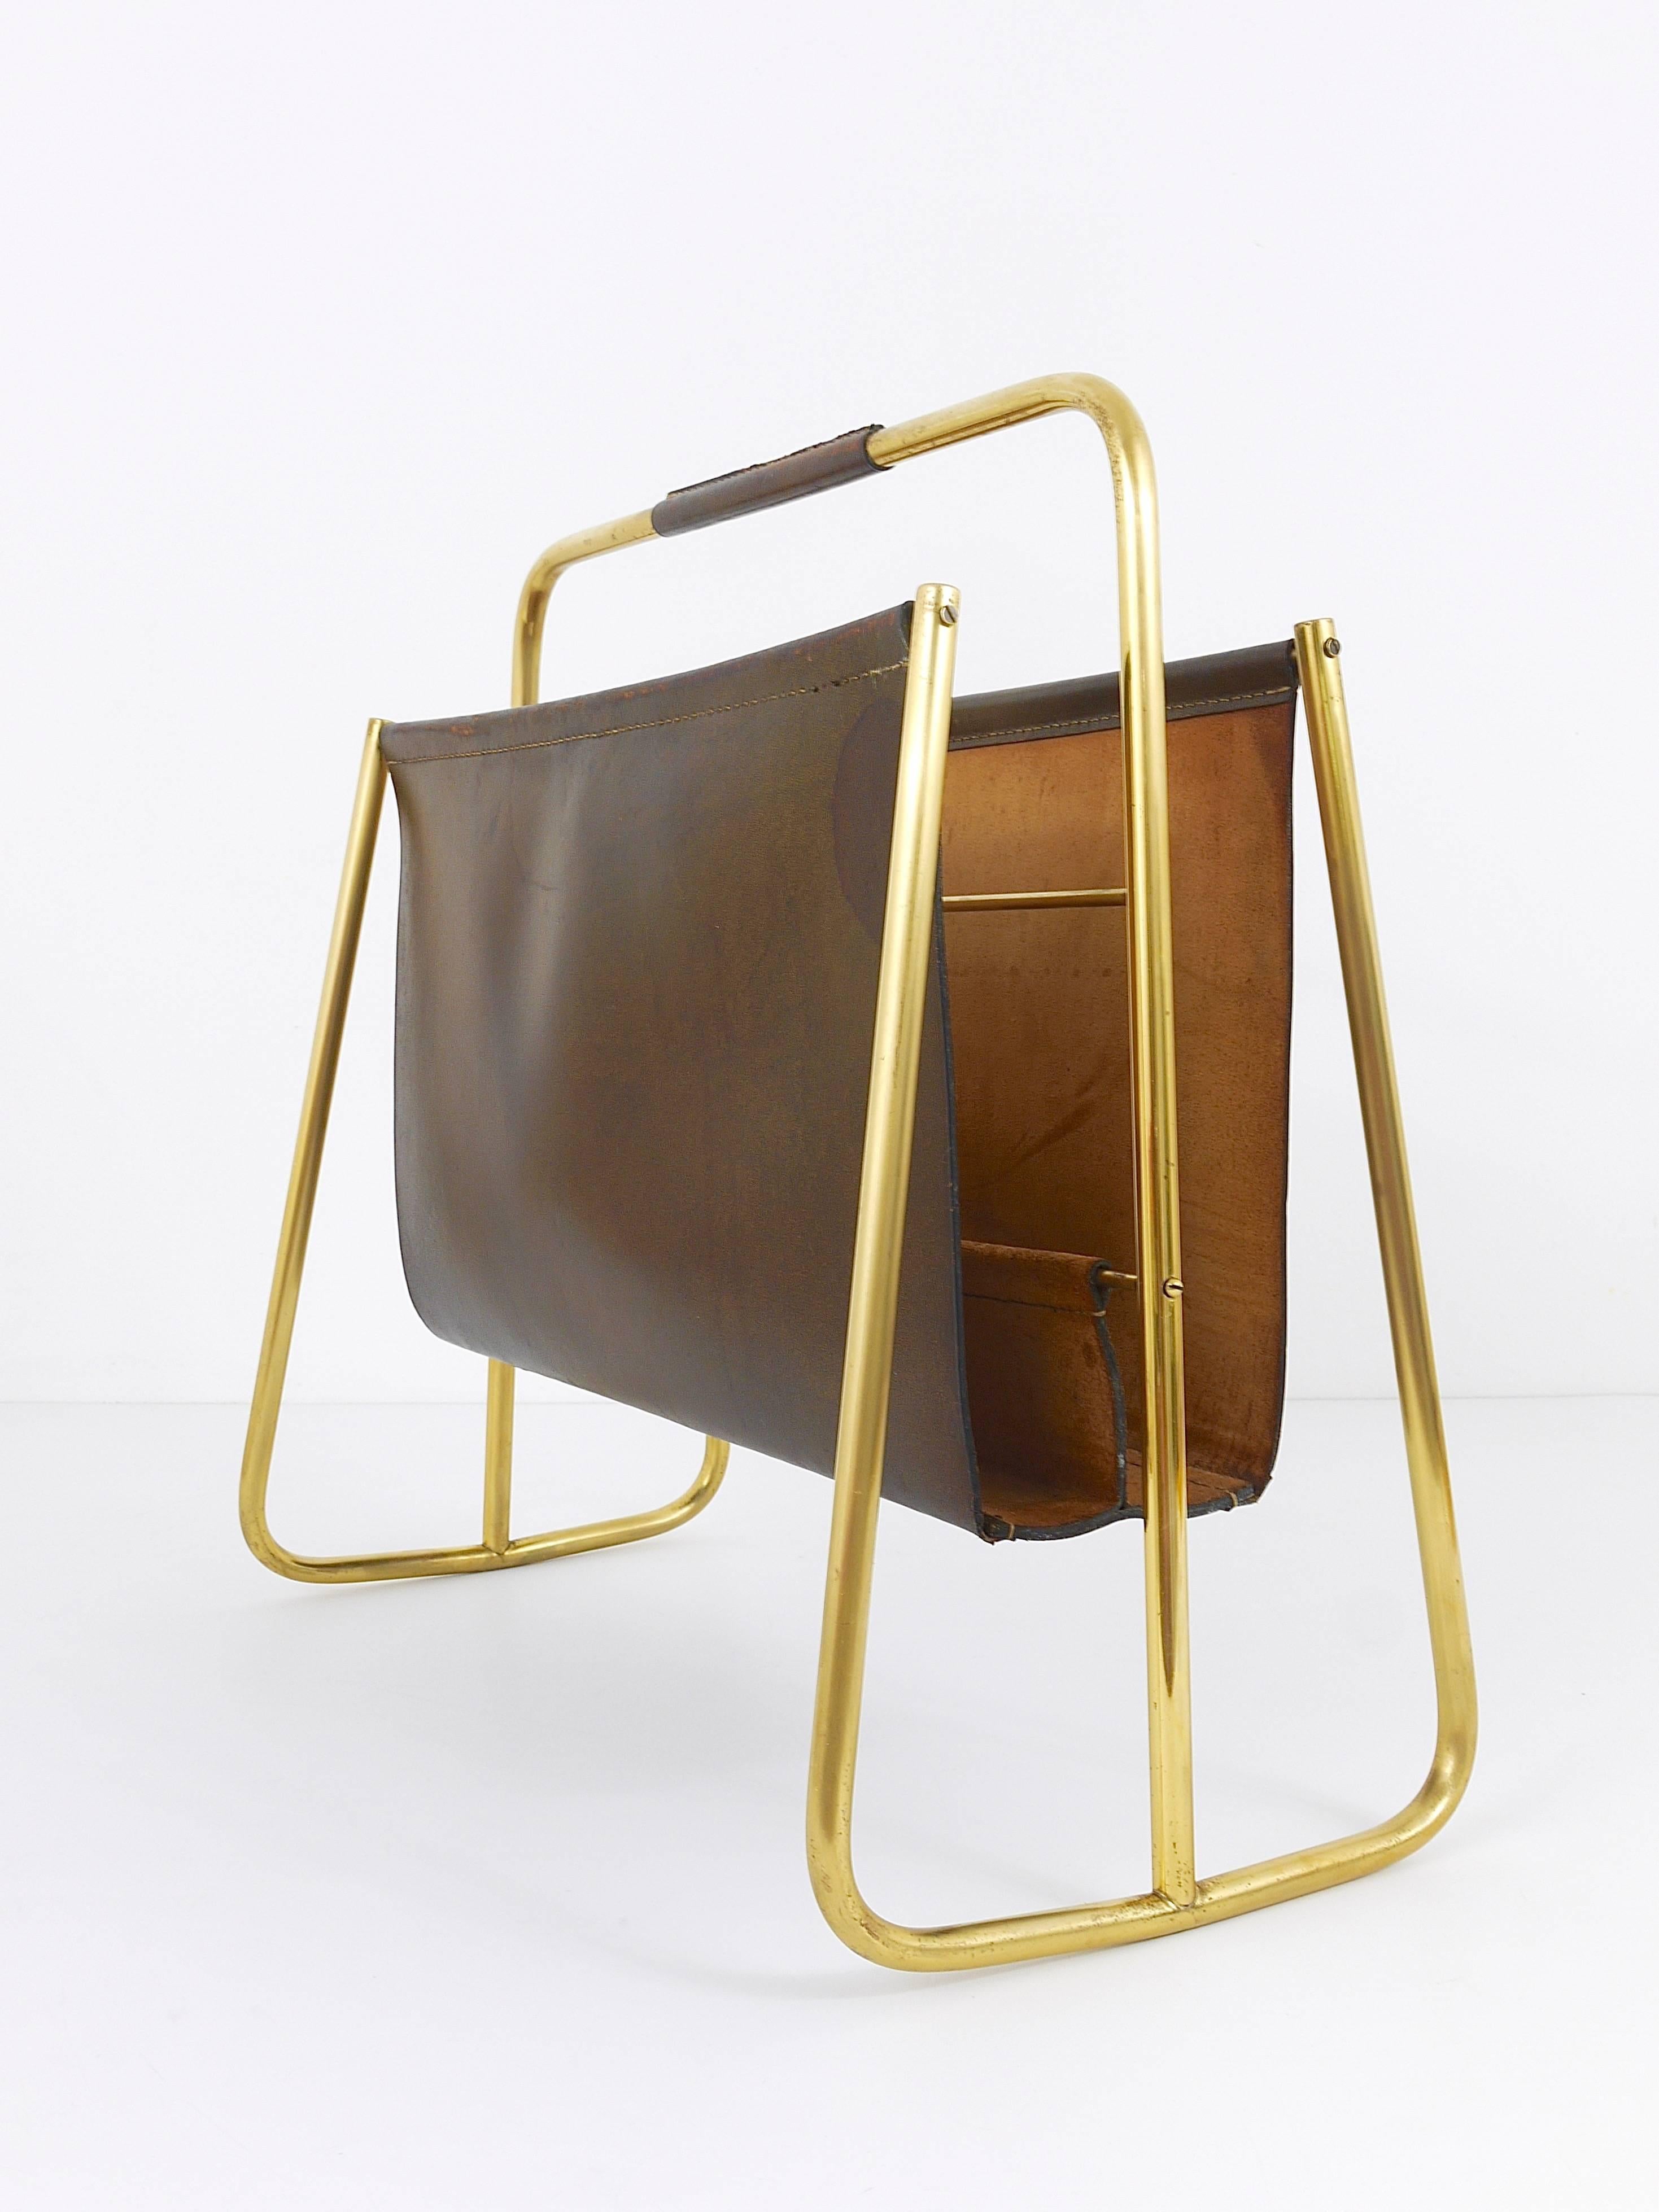 A rare and beautiful modernist magazine stand from the, designed and manufactured by Carl Auböck, Austria. In very good original condition with charming patina on the brass and the leather.